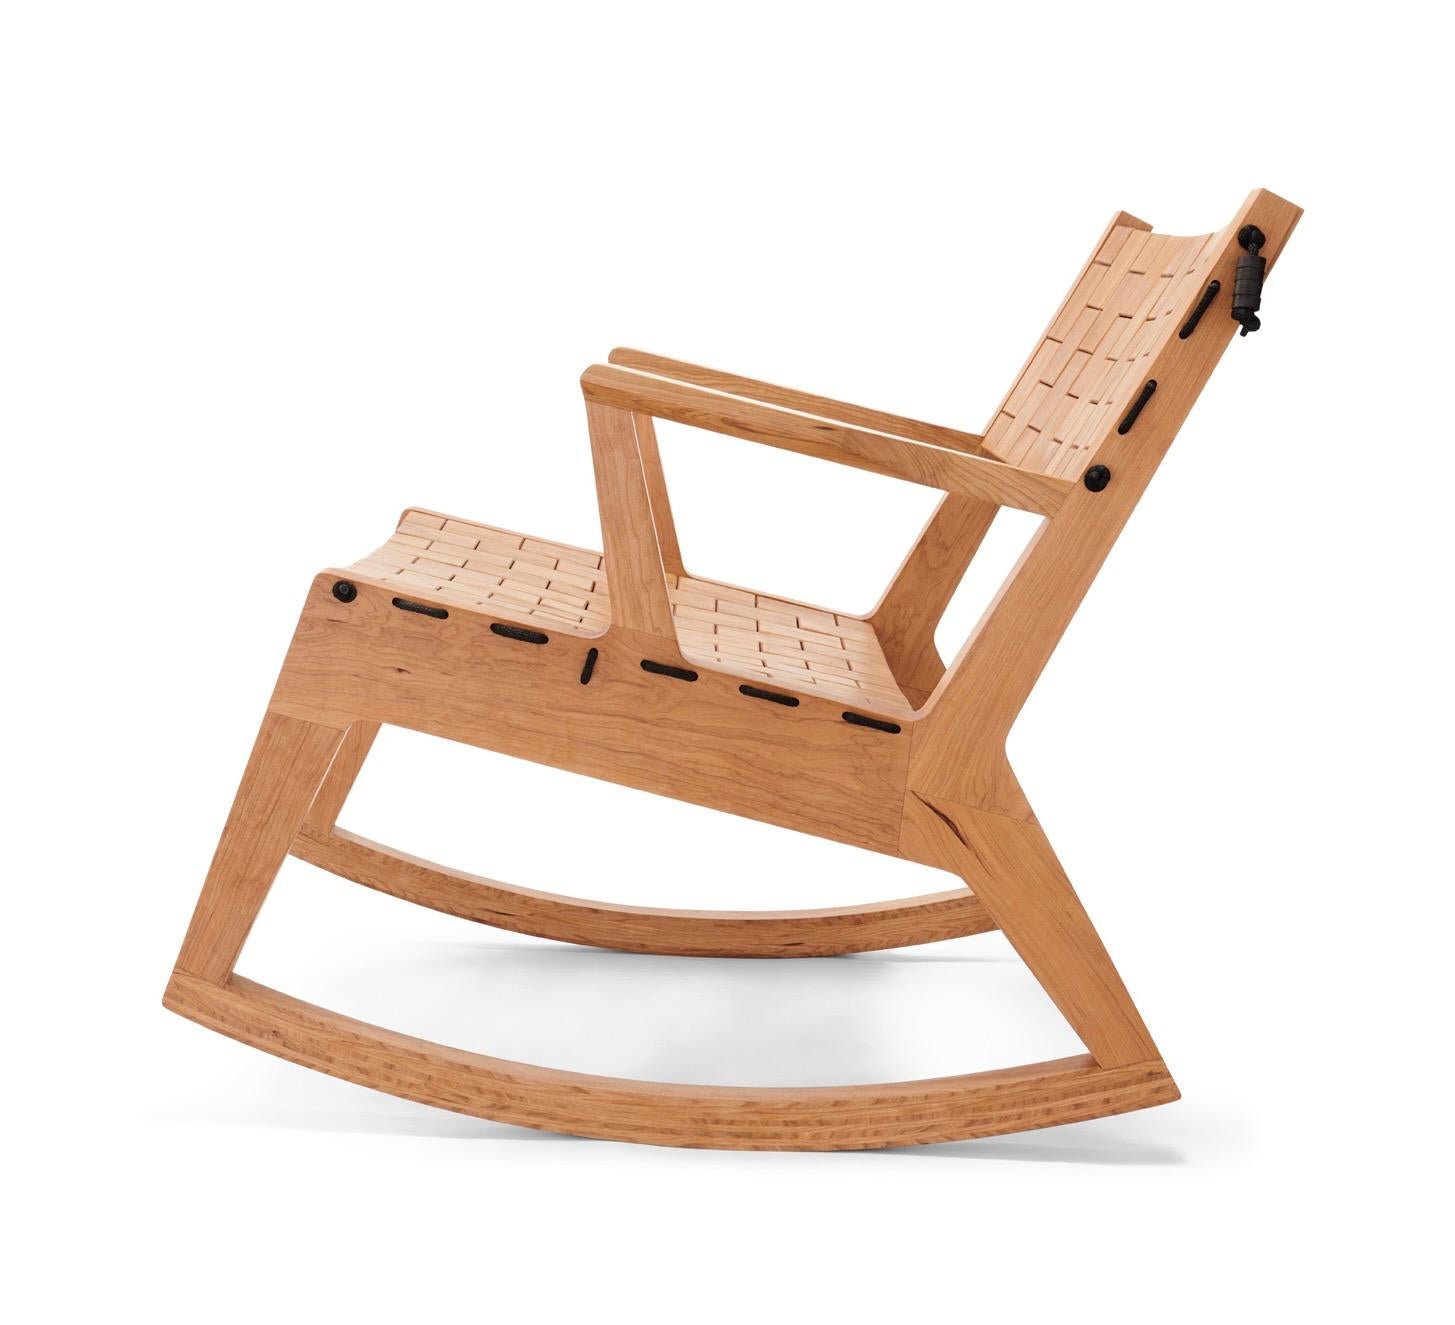 Woodsport RB rocking chair. Named after the running bond pattern in which bricks are laid. Individual pieces are laced together with high grade polyester rope, creating a soft surface that flexes with the occupant. The chair is detailed with burl